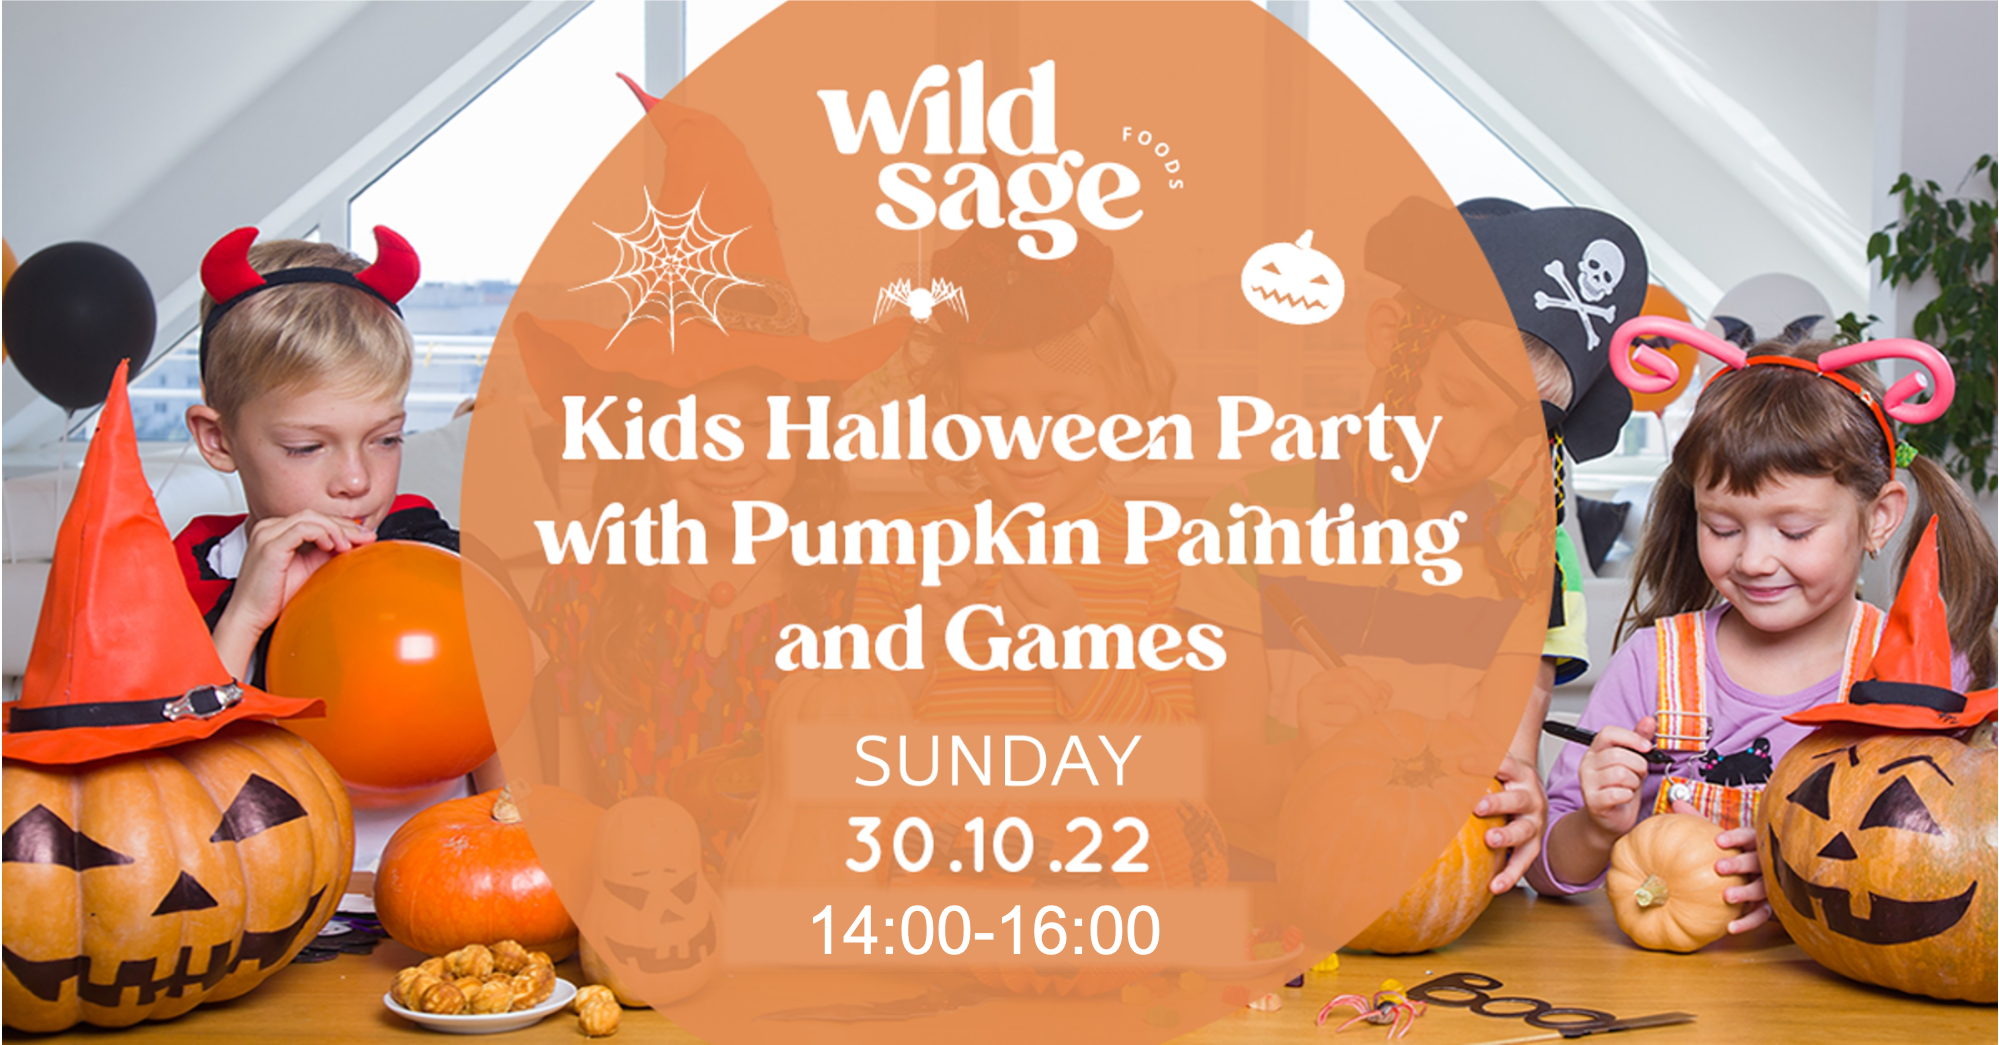 Kids Halloween Party with Pumpkin Painting and Games (30.10.2022)